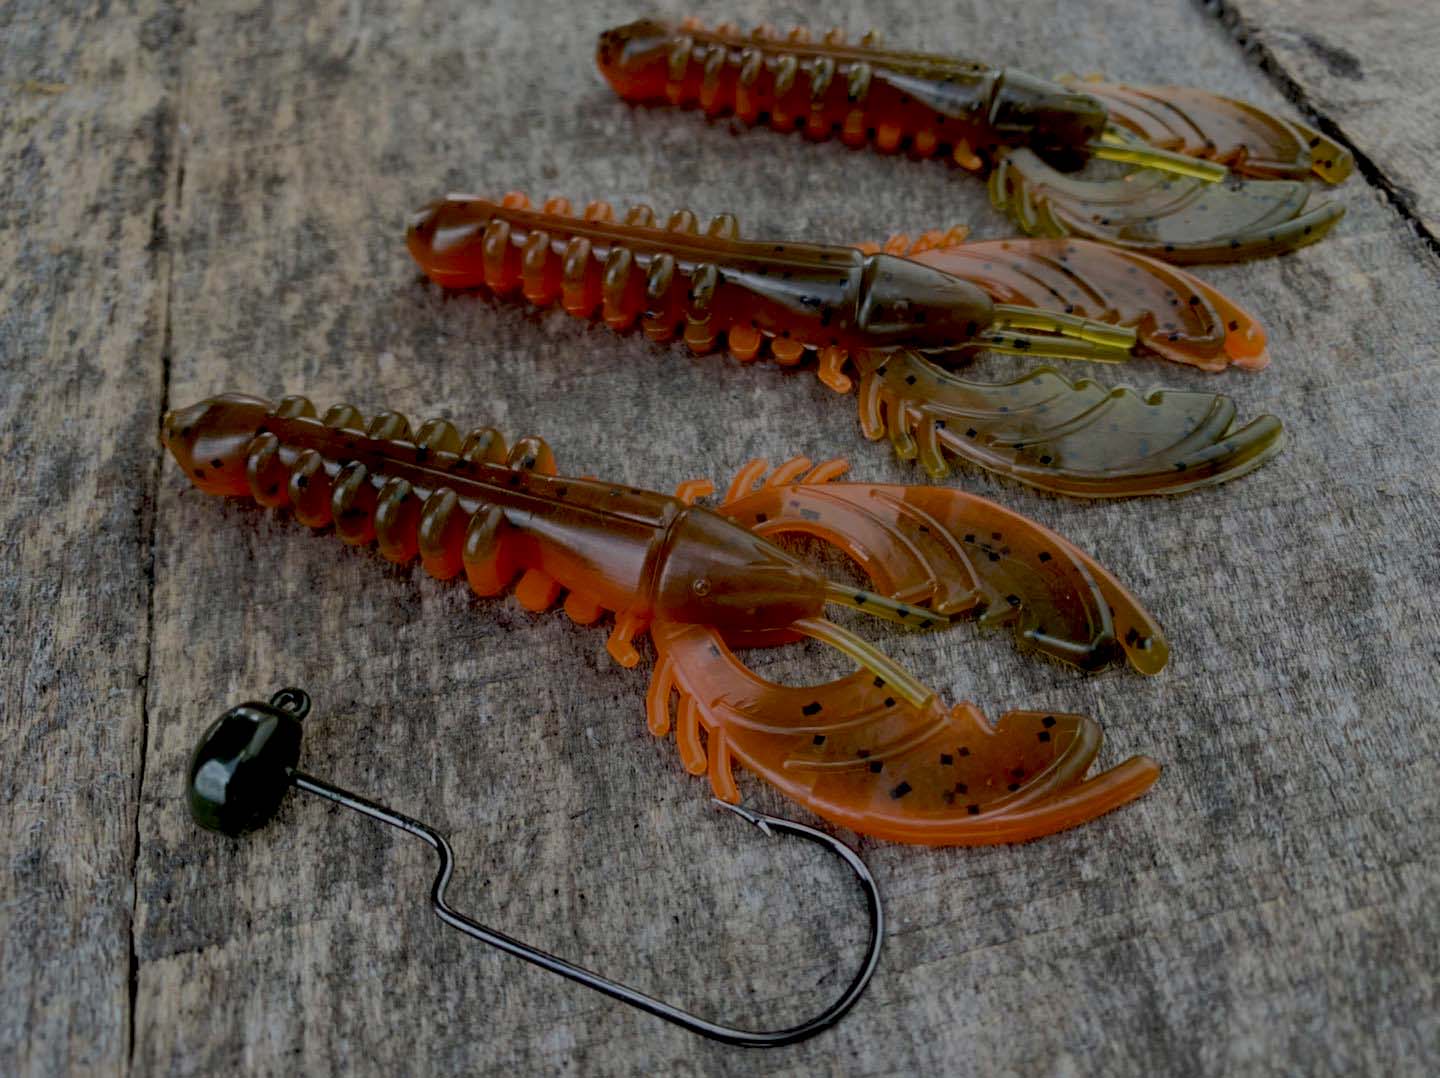 Fishing Accessories from Venom Lures